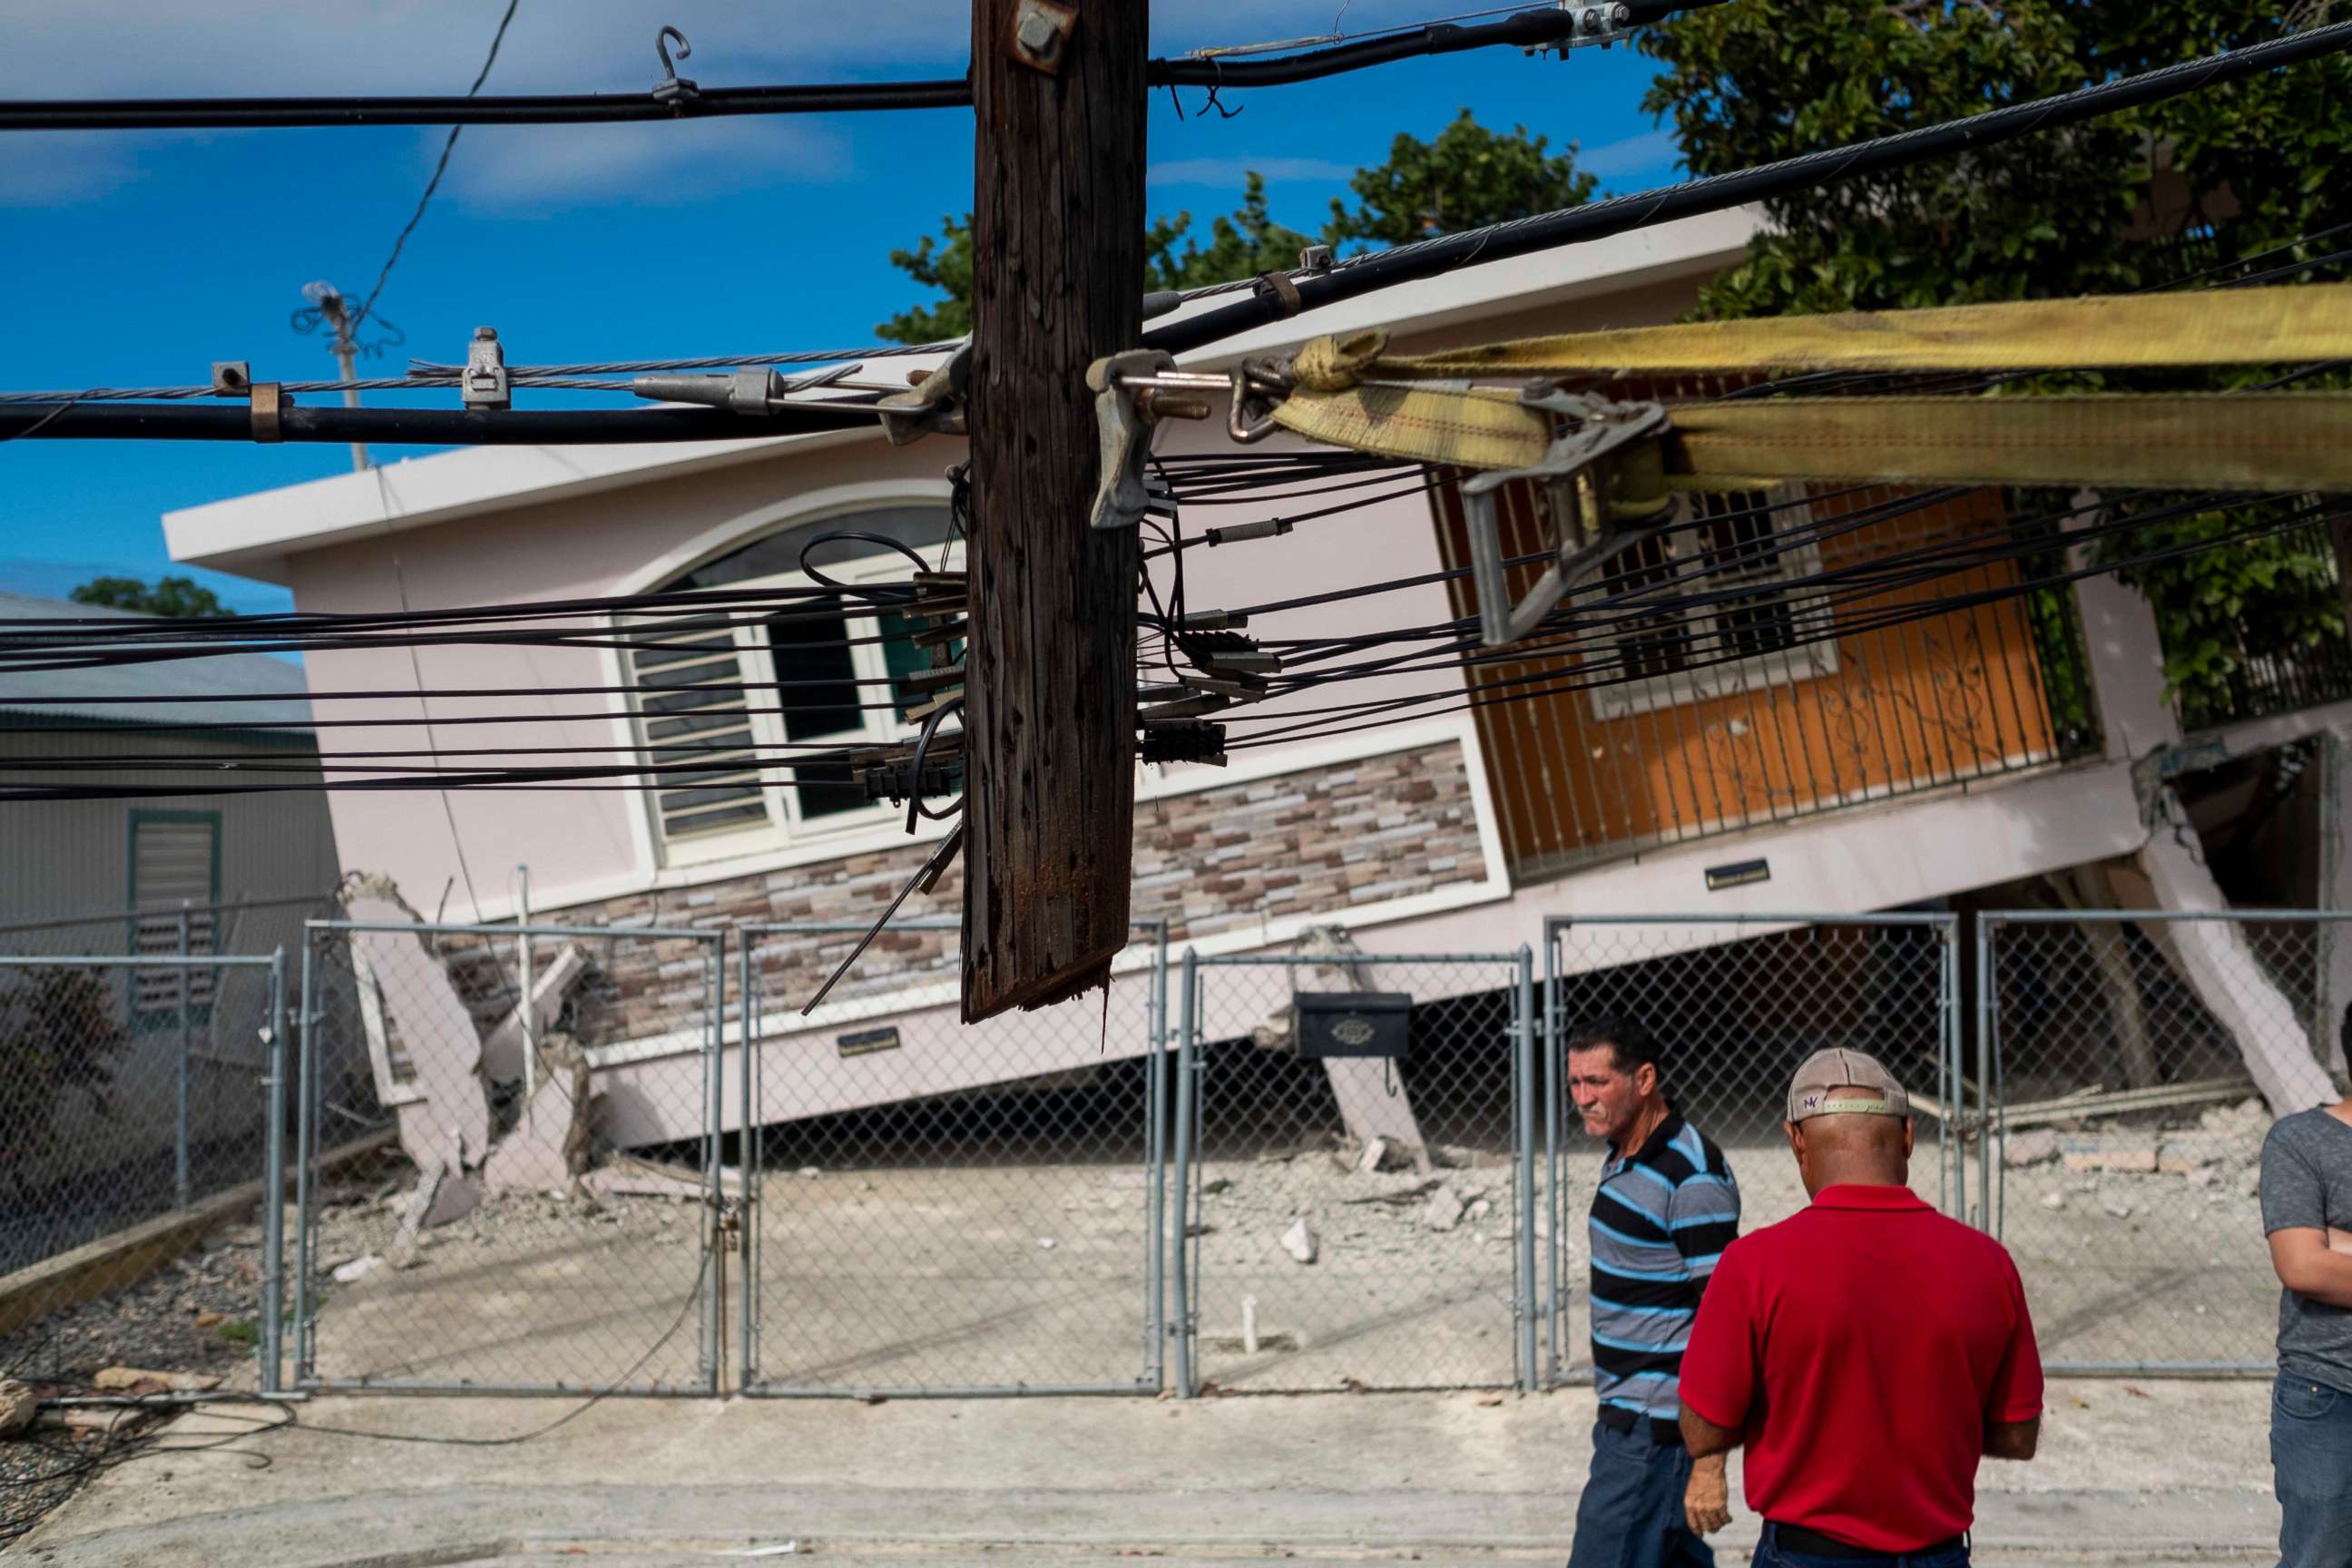 PHOTO: People pass by a house damaged by a 5.8 earthquake in Guanica, Puerto Rico on January 6, 2020. 